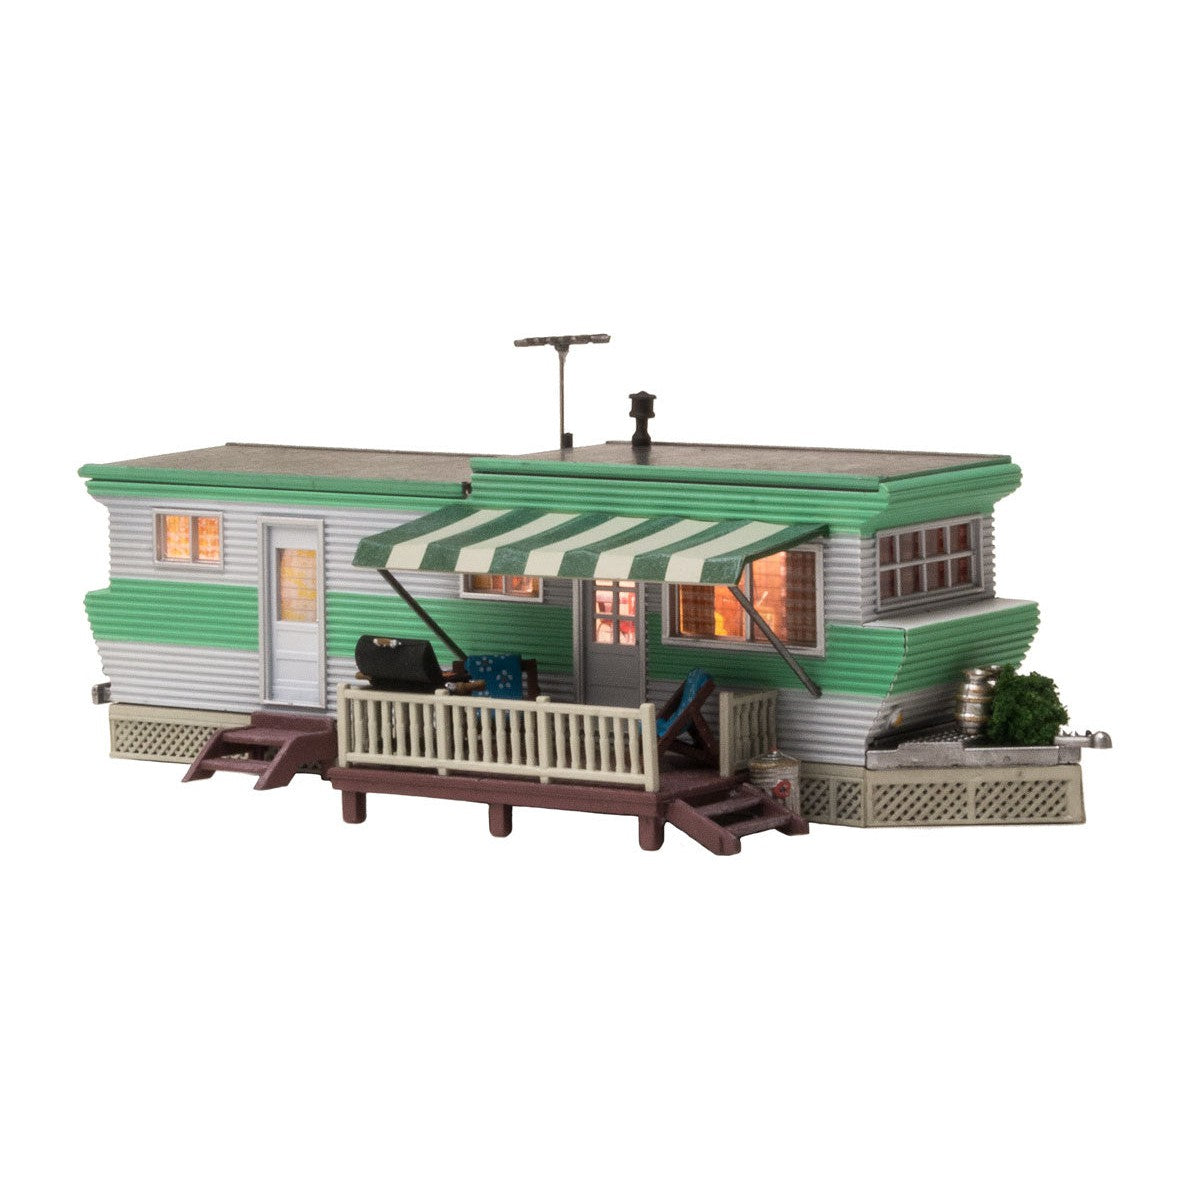 Woodland Scenics N Scale Grillin’ & Chillin’ Trailer Built and Ready